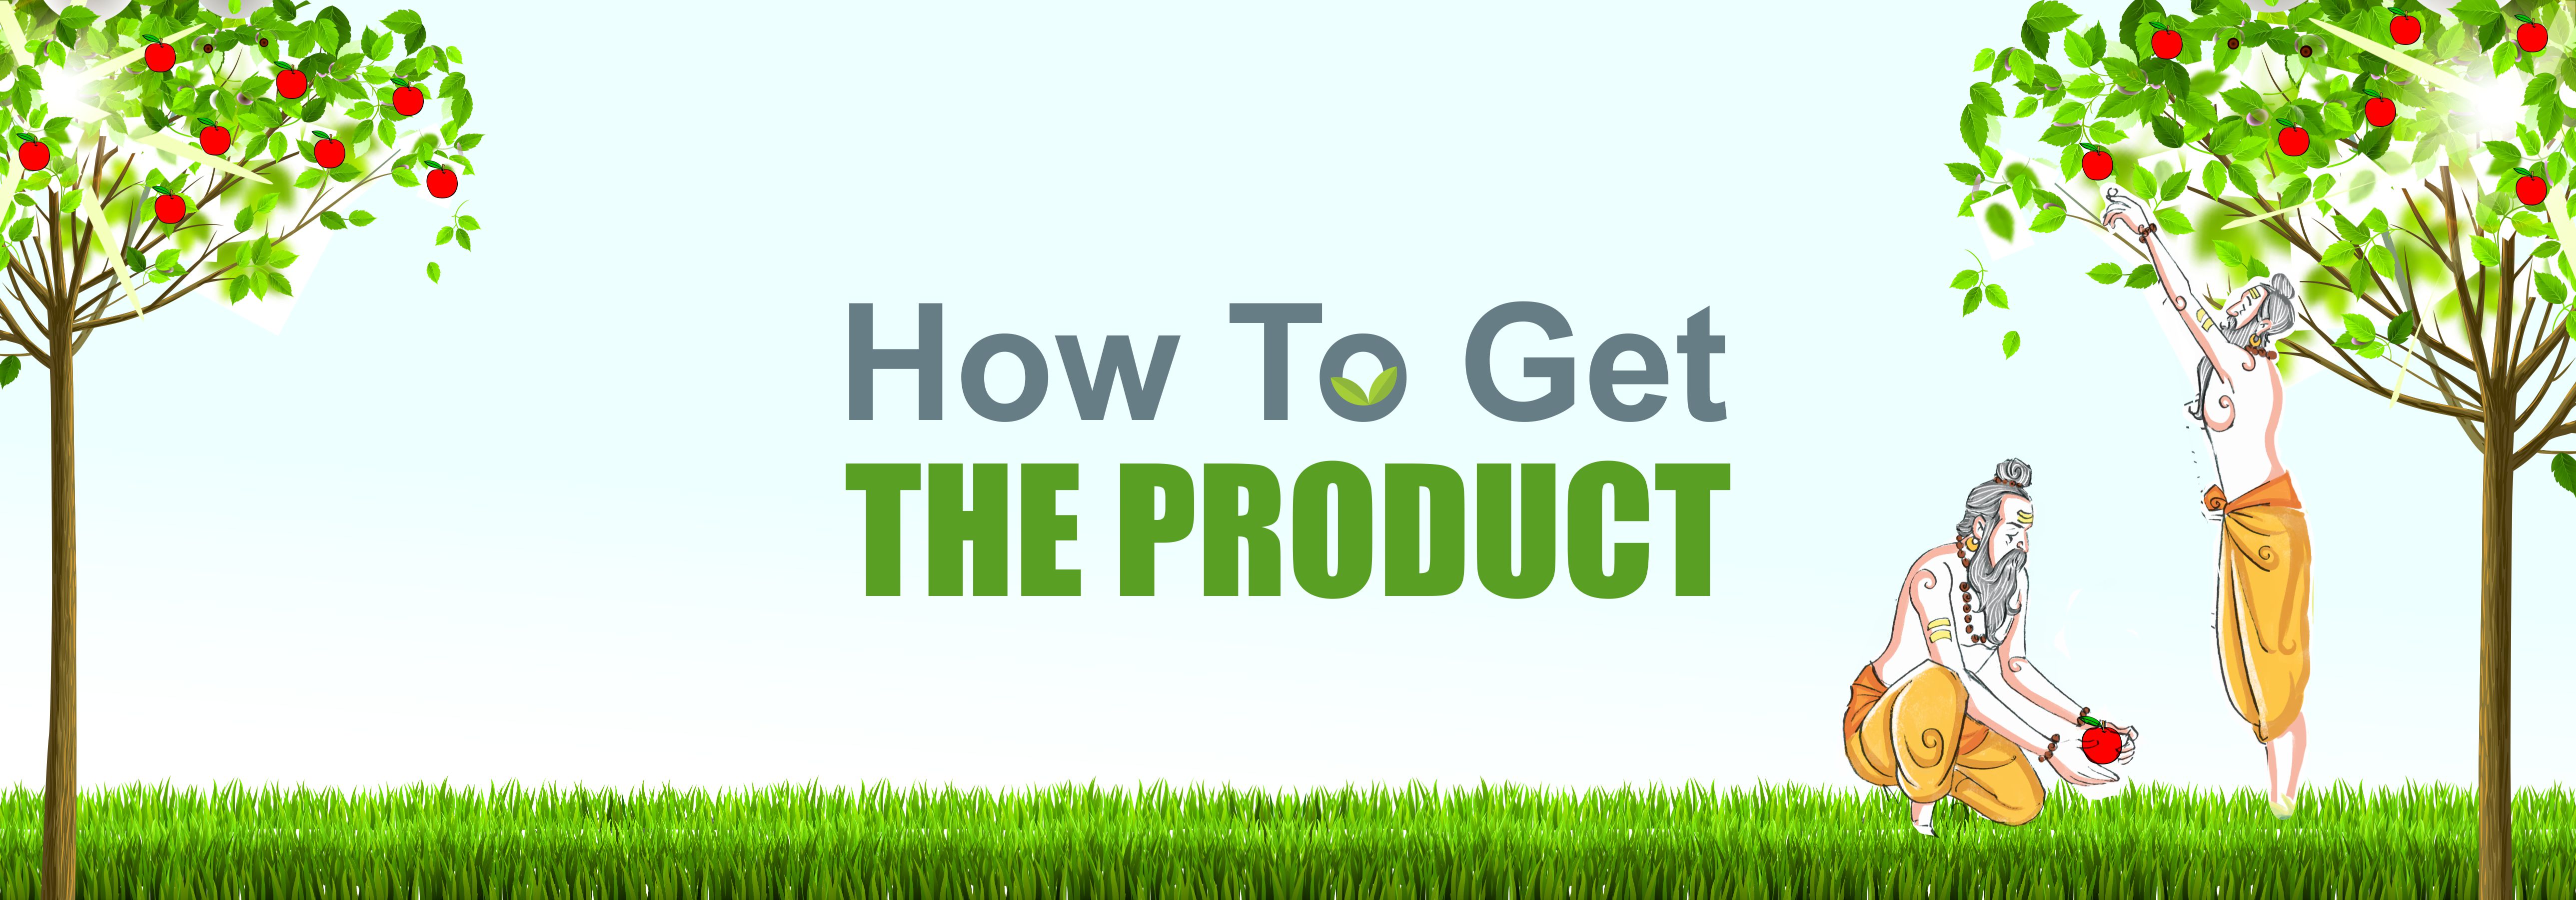 How to Get the Product